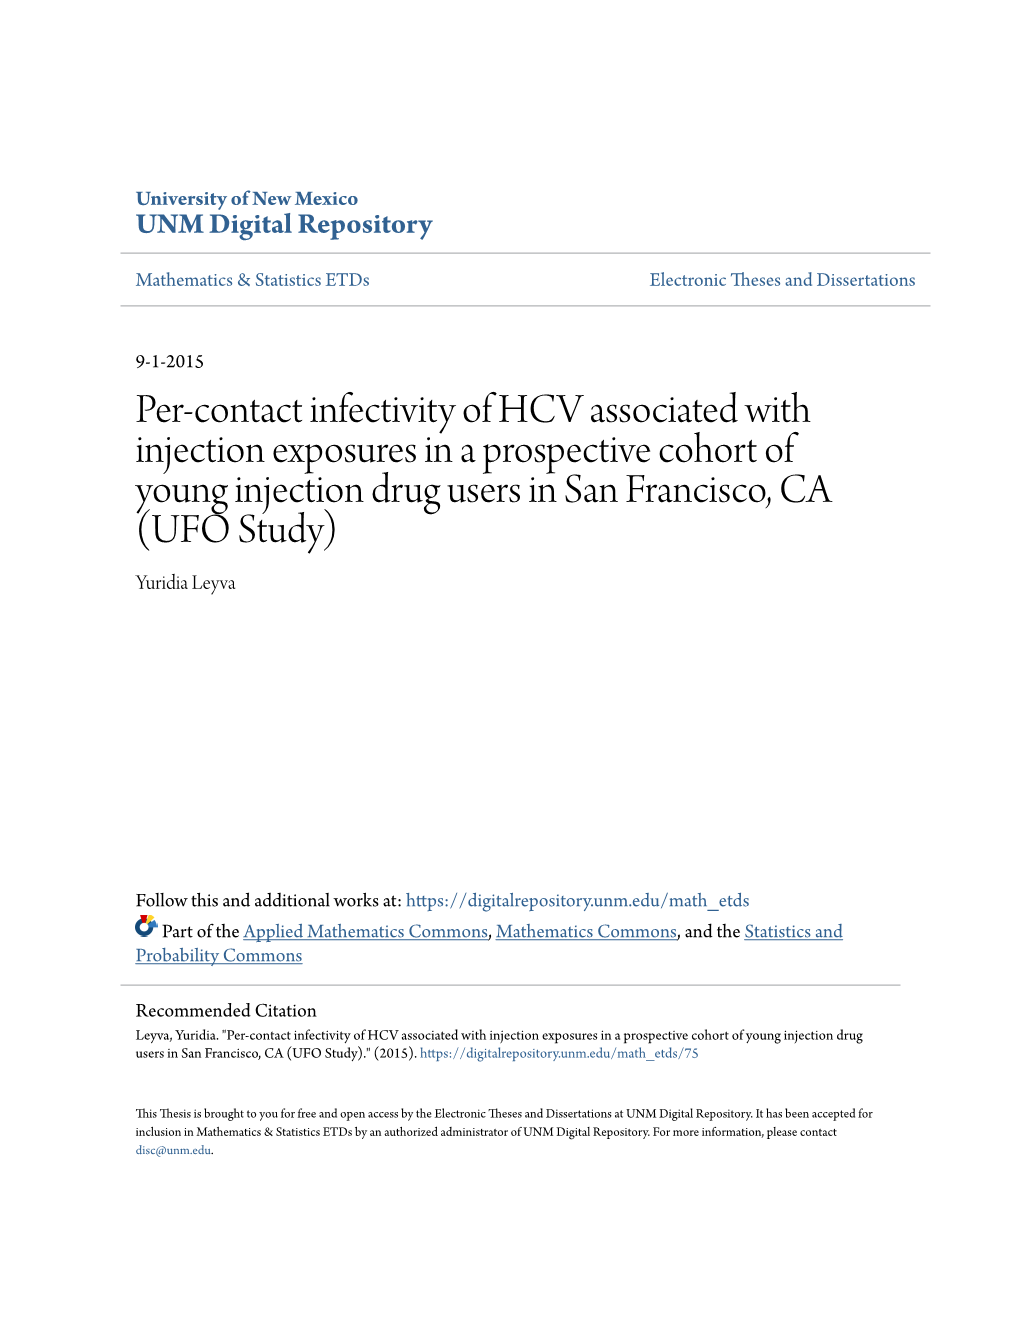 Per-Contact Infectivity of HCV Associated with Injection Exposures in a Prospective Cohort of Young Injection Drug Users In